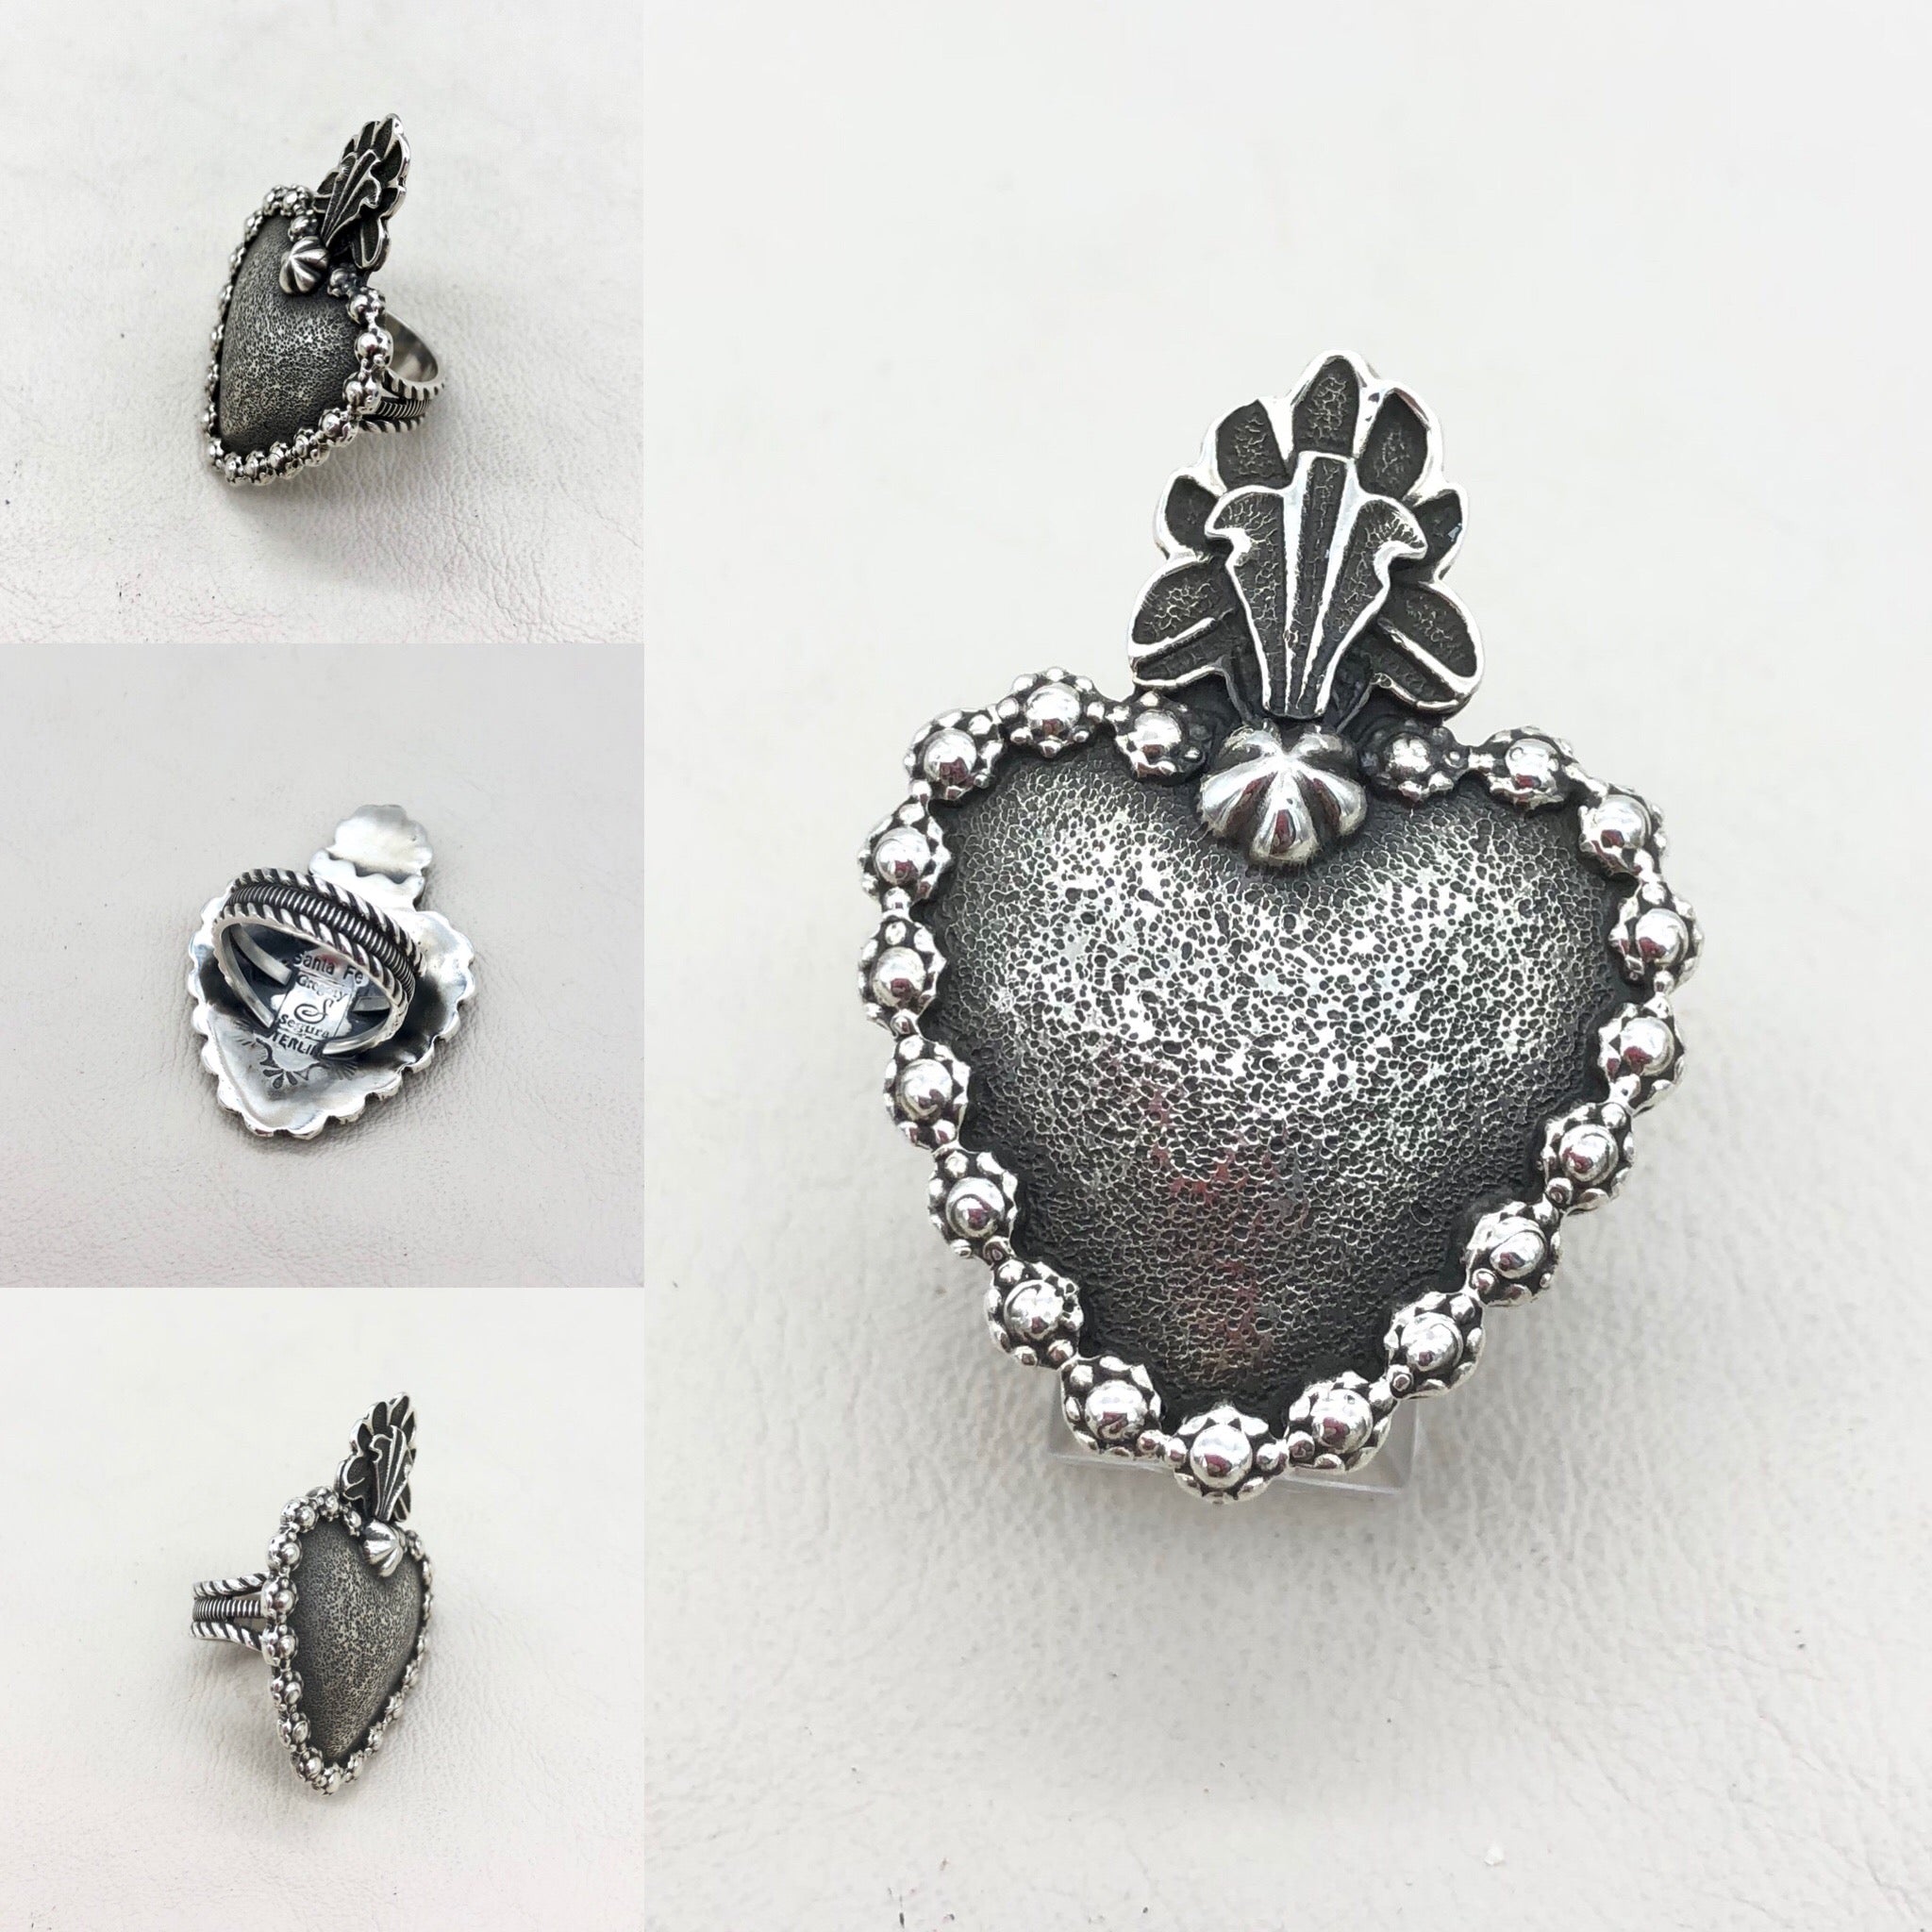 Poeh Heart Sterling Silver Ring